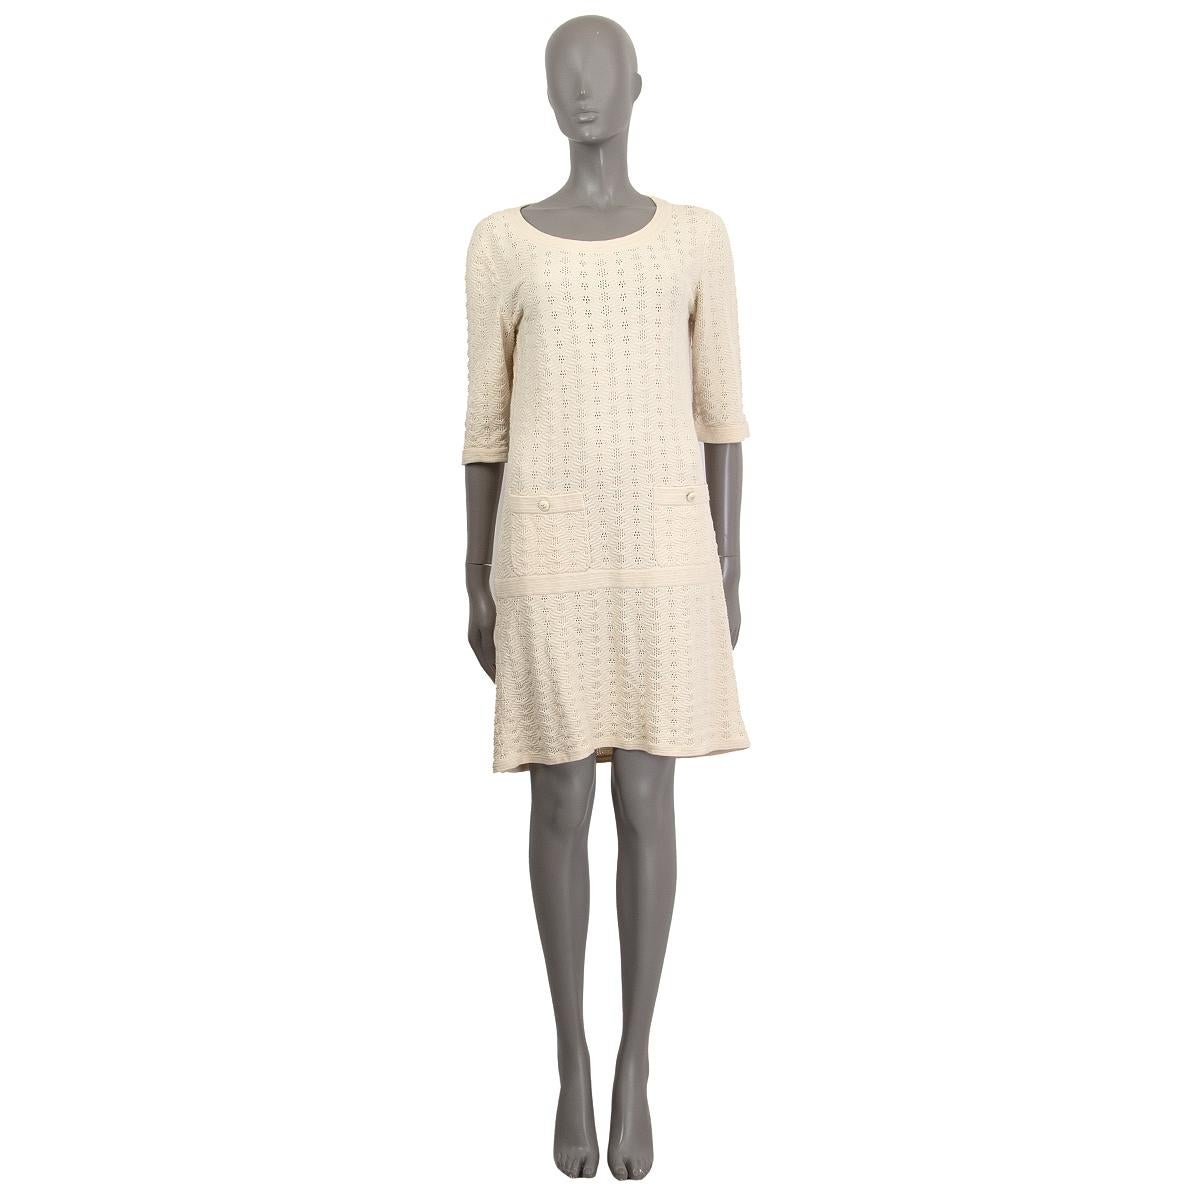 100% authentic Chanel short sleeve knitted drop-waist dress in sand cotton (100%) with a round neck and two decorative buttoned pockets on the front. Unlined. Has been worn and is in excellent condition. 

2013